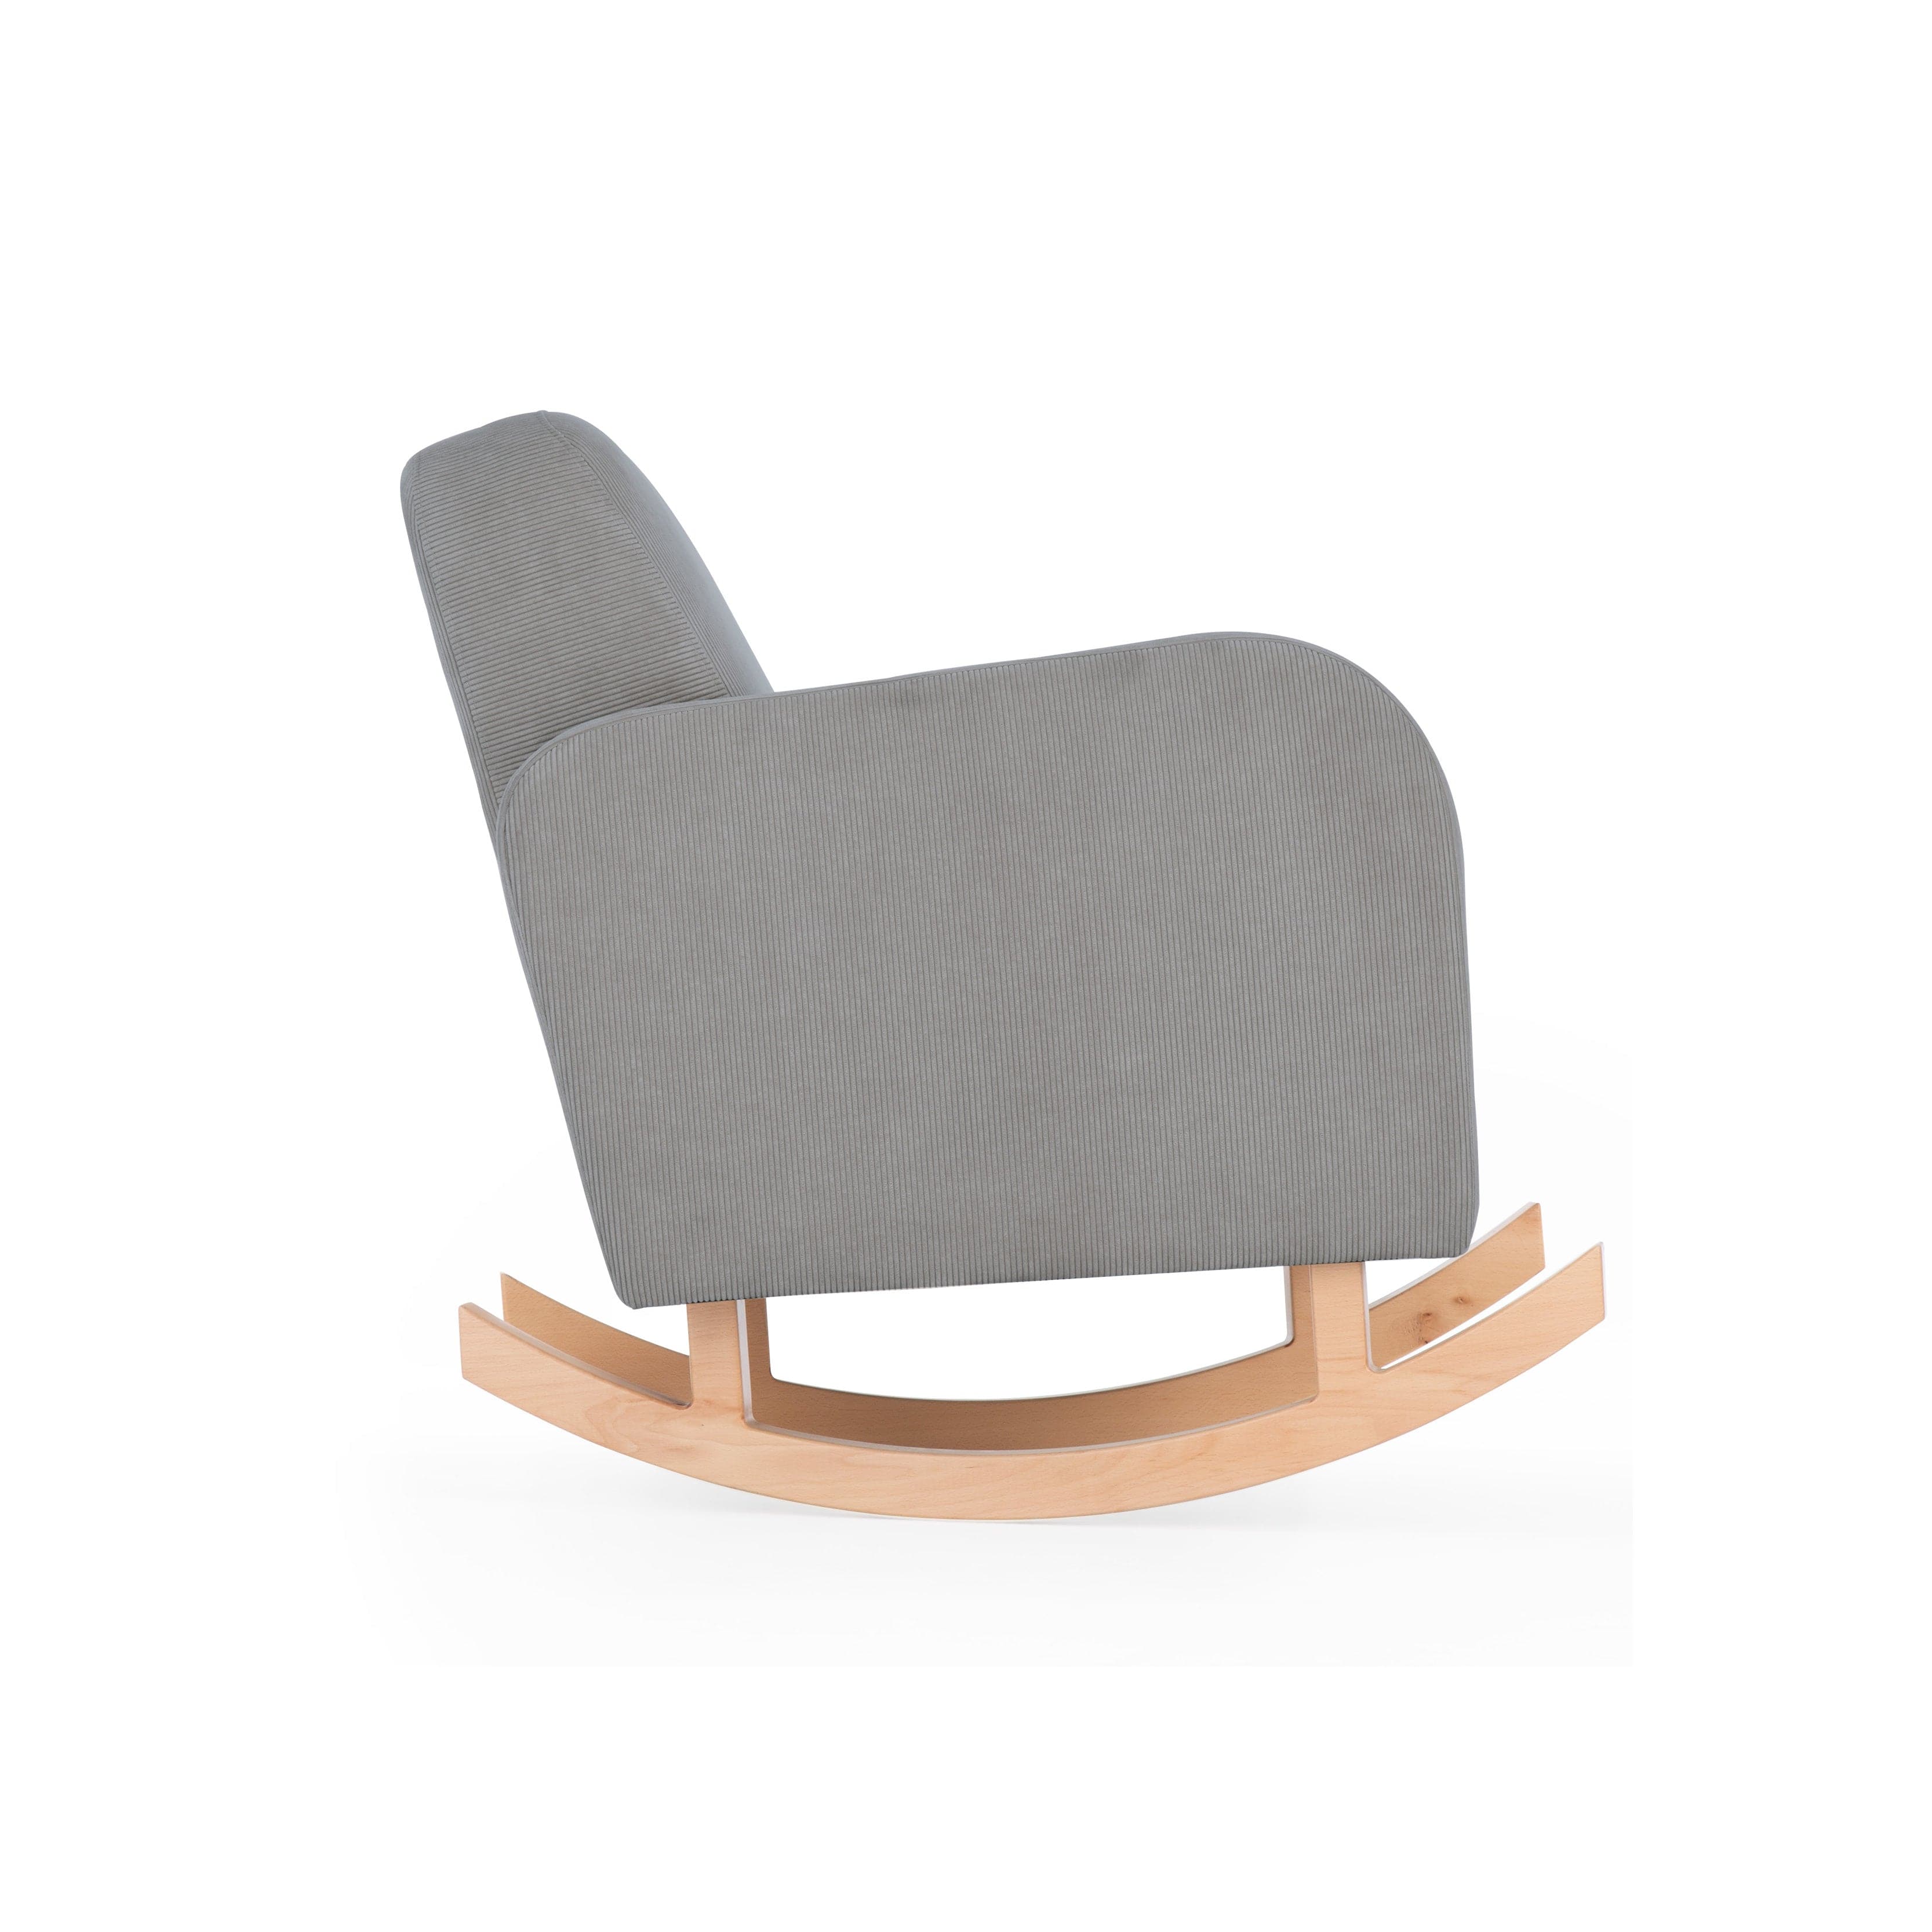 Cuddleco Etta Nursing Chair - Anthracite - For Your Little One